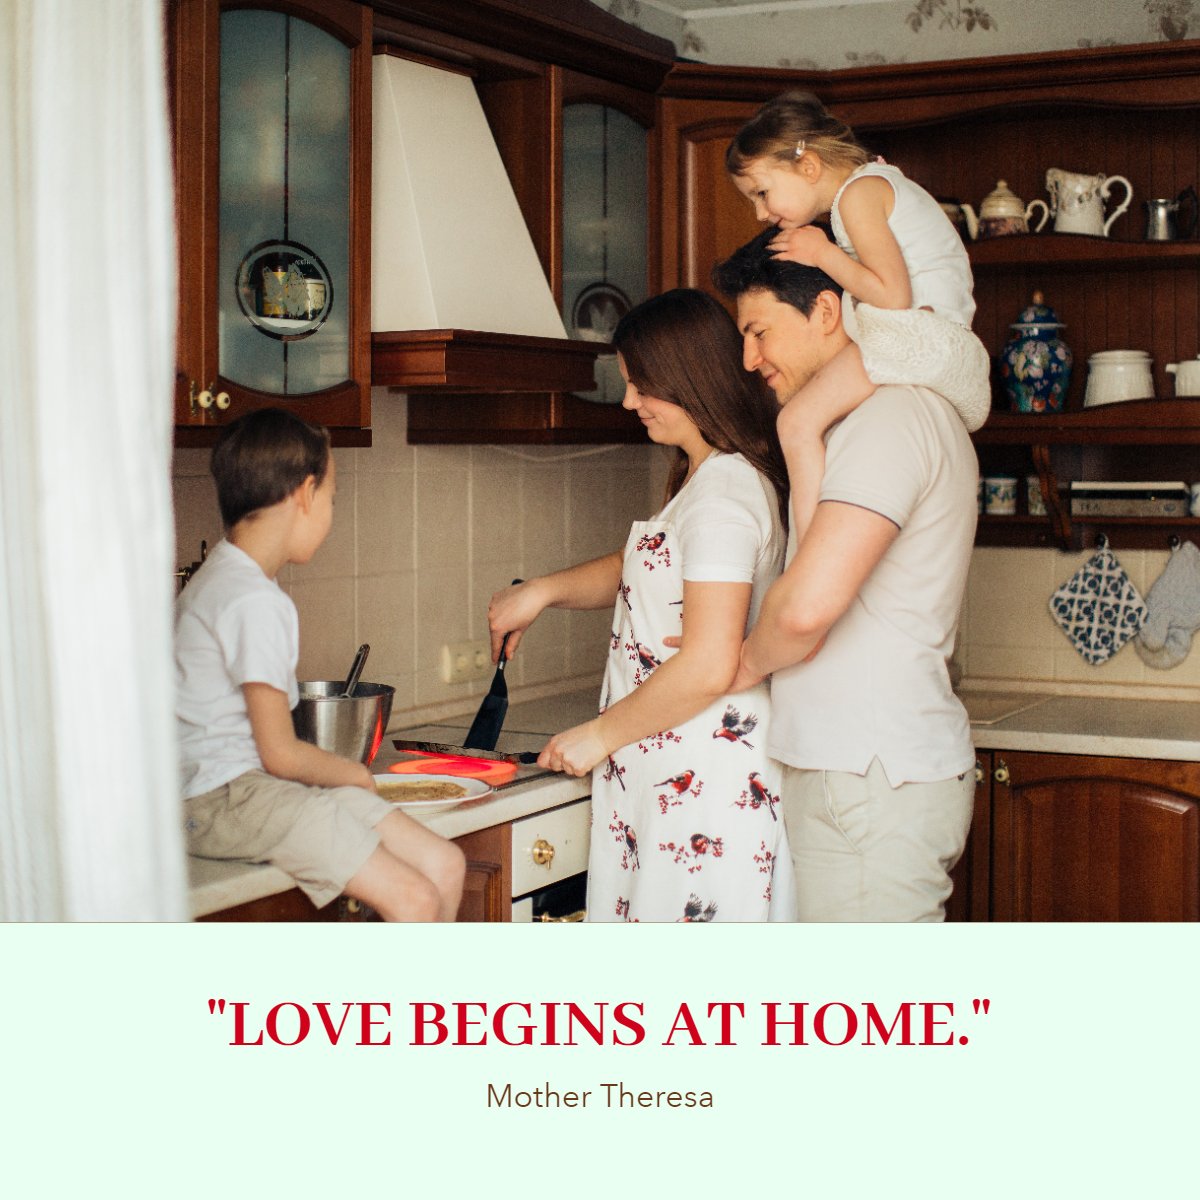 'Love begins at home' 
— Mother Theresa 📖

#quoteoftheday #quotestagram #lifequotes #realestate #quotes #mothertheresa
 #AmericasMortgageSolutions #christianpenner #onestopbrokershop #mortgagebrokerwestpalmbeach #epicrealeststedeals #TheChristianPennerMortgageTeam